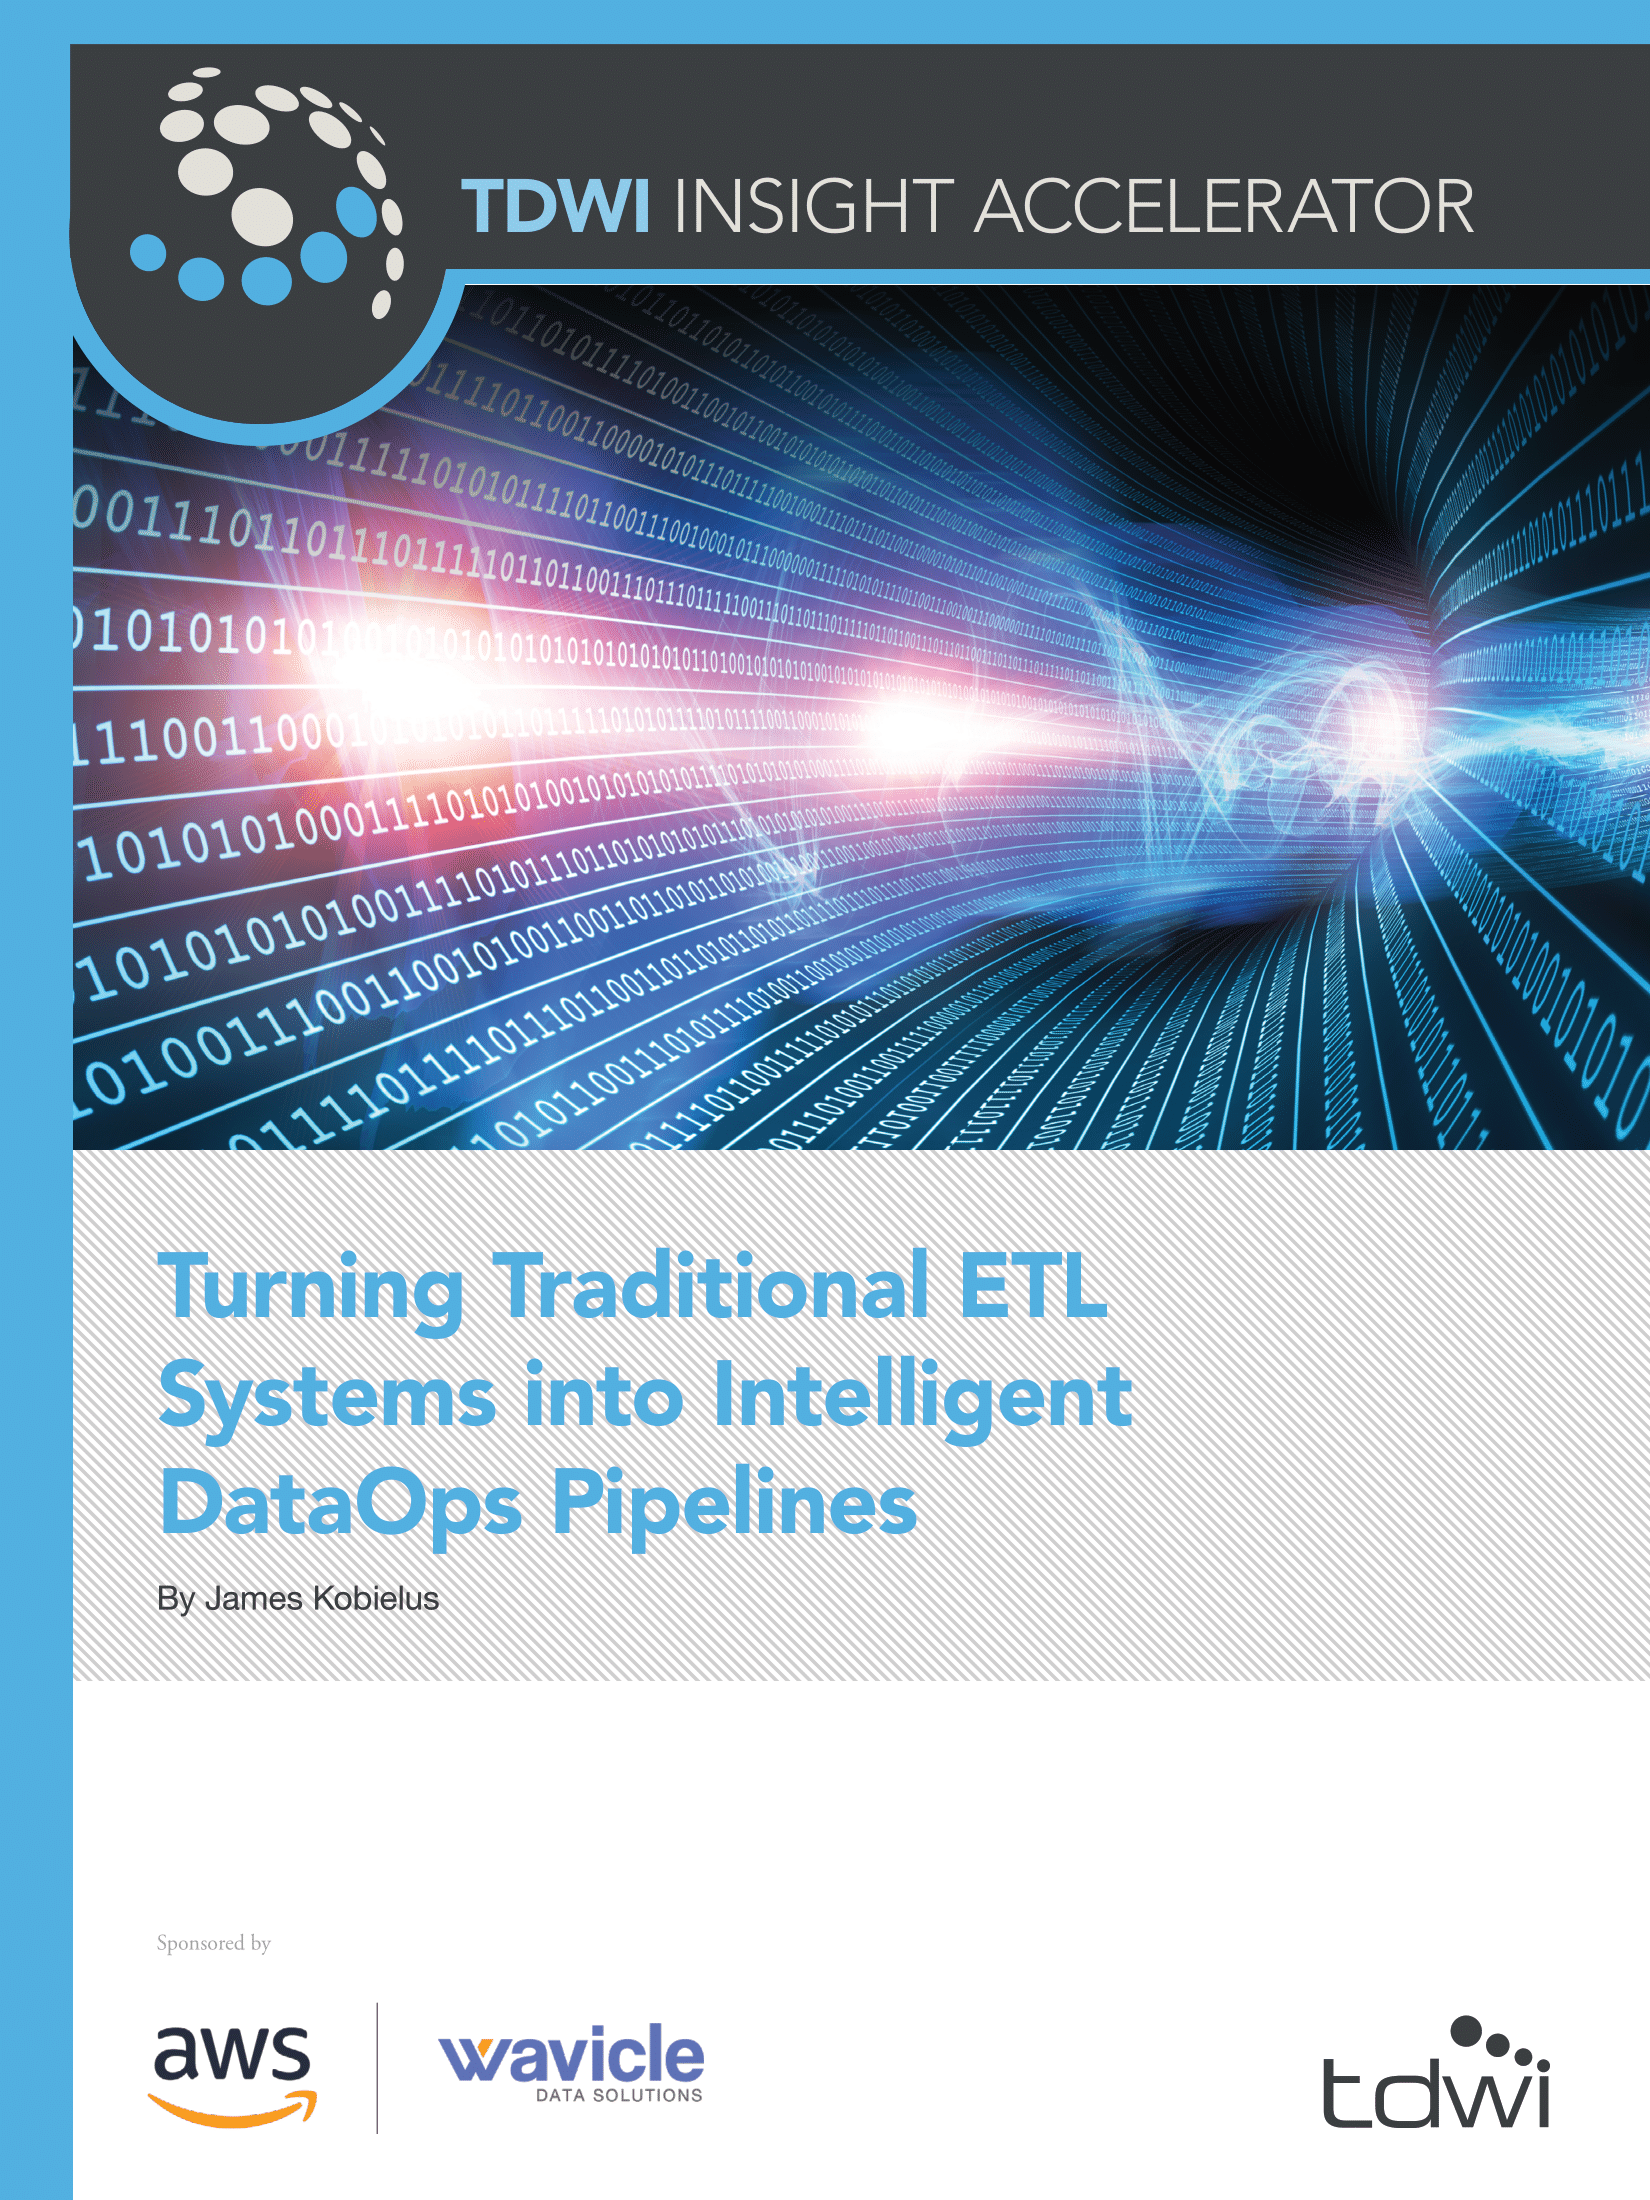 TDWI Insight Accelerator _ Turning Traditional ETL Systems into Intelligent DataOps Pipelines-1